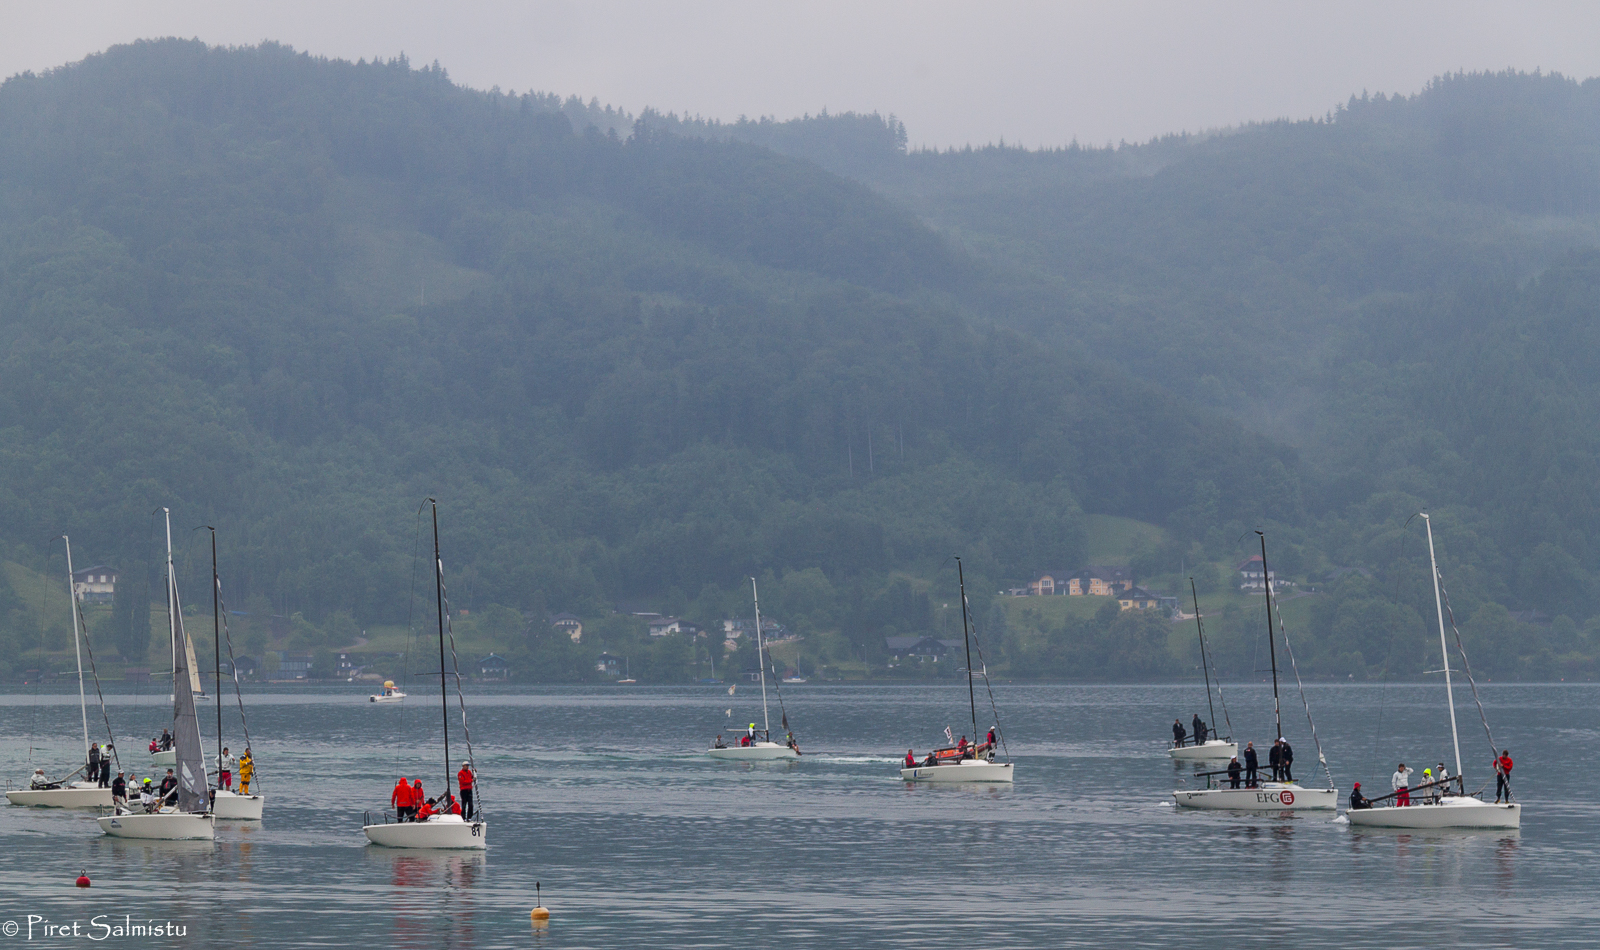  Melges 24  European Sailing Series  Attersee AUT  Day 2